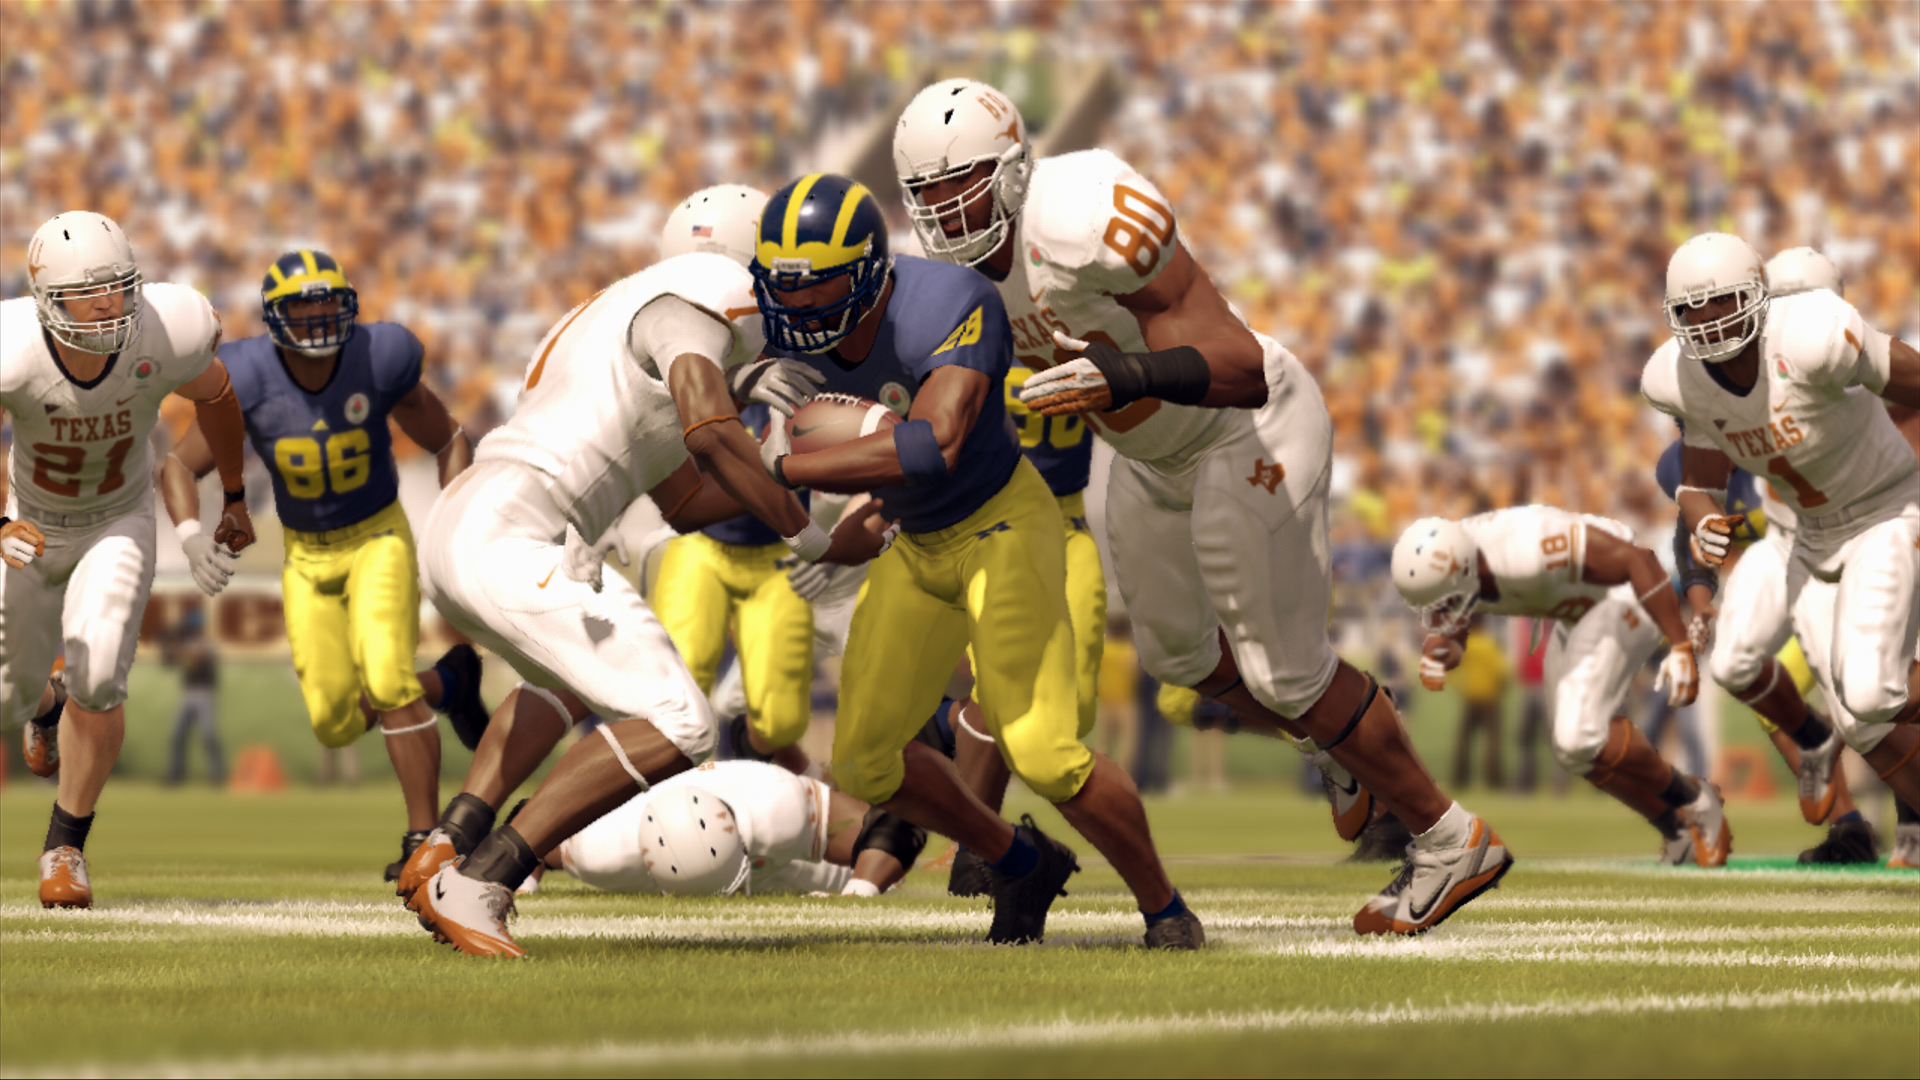 NCAA Football 12 Gameplay and Presentation Week-in-Review